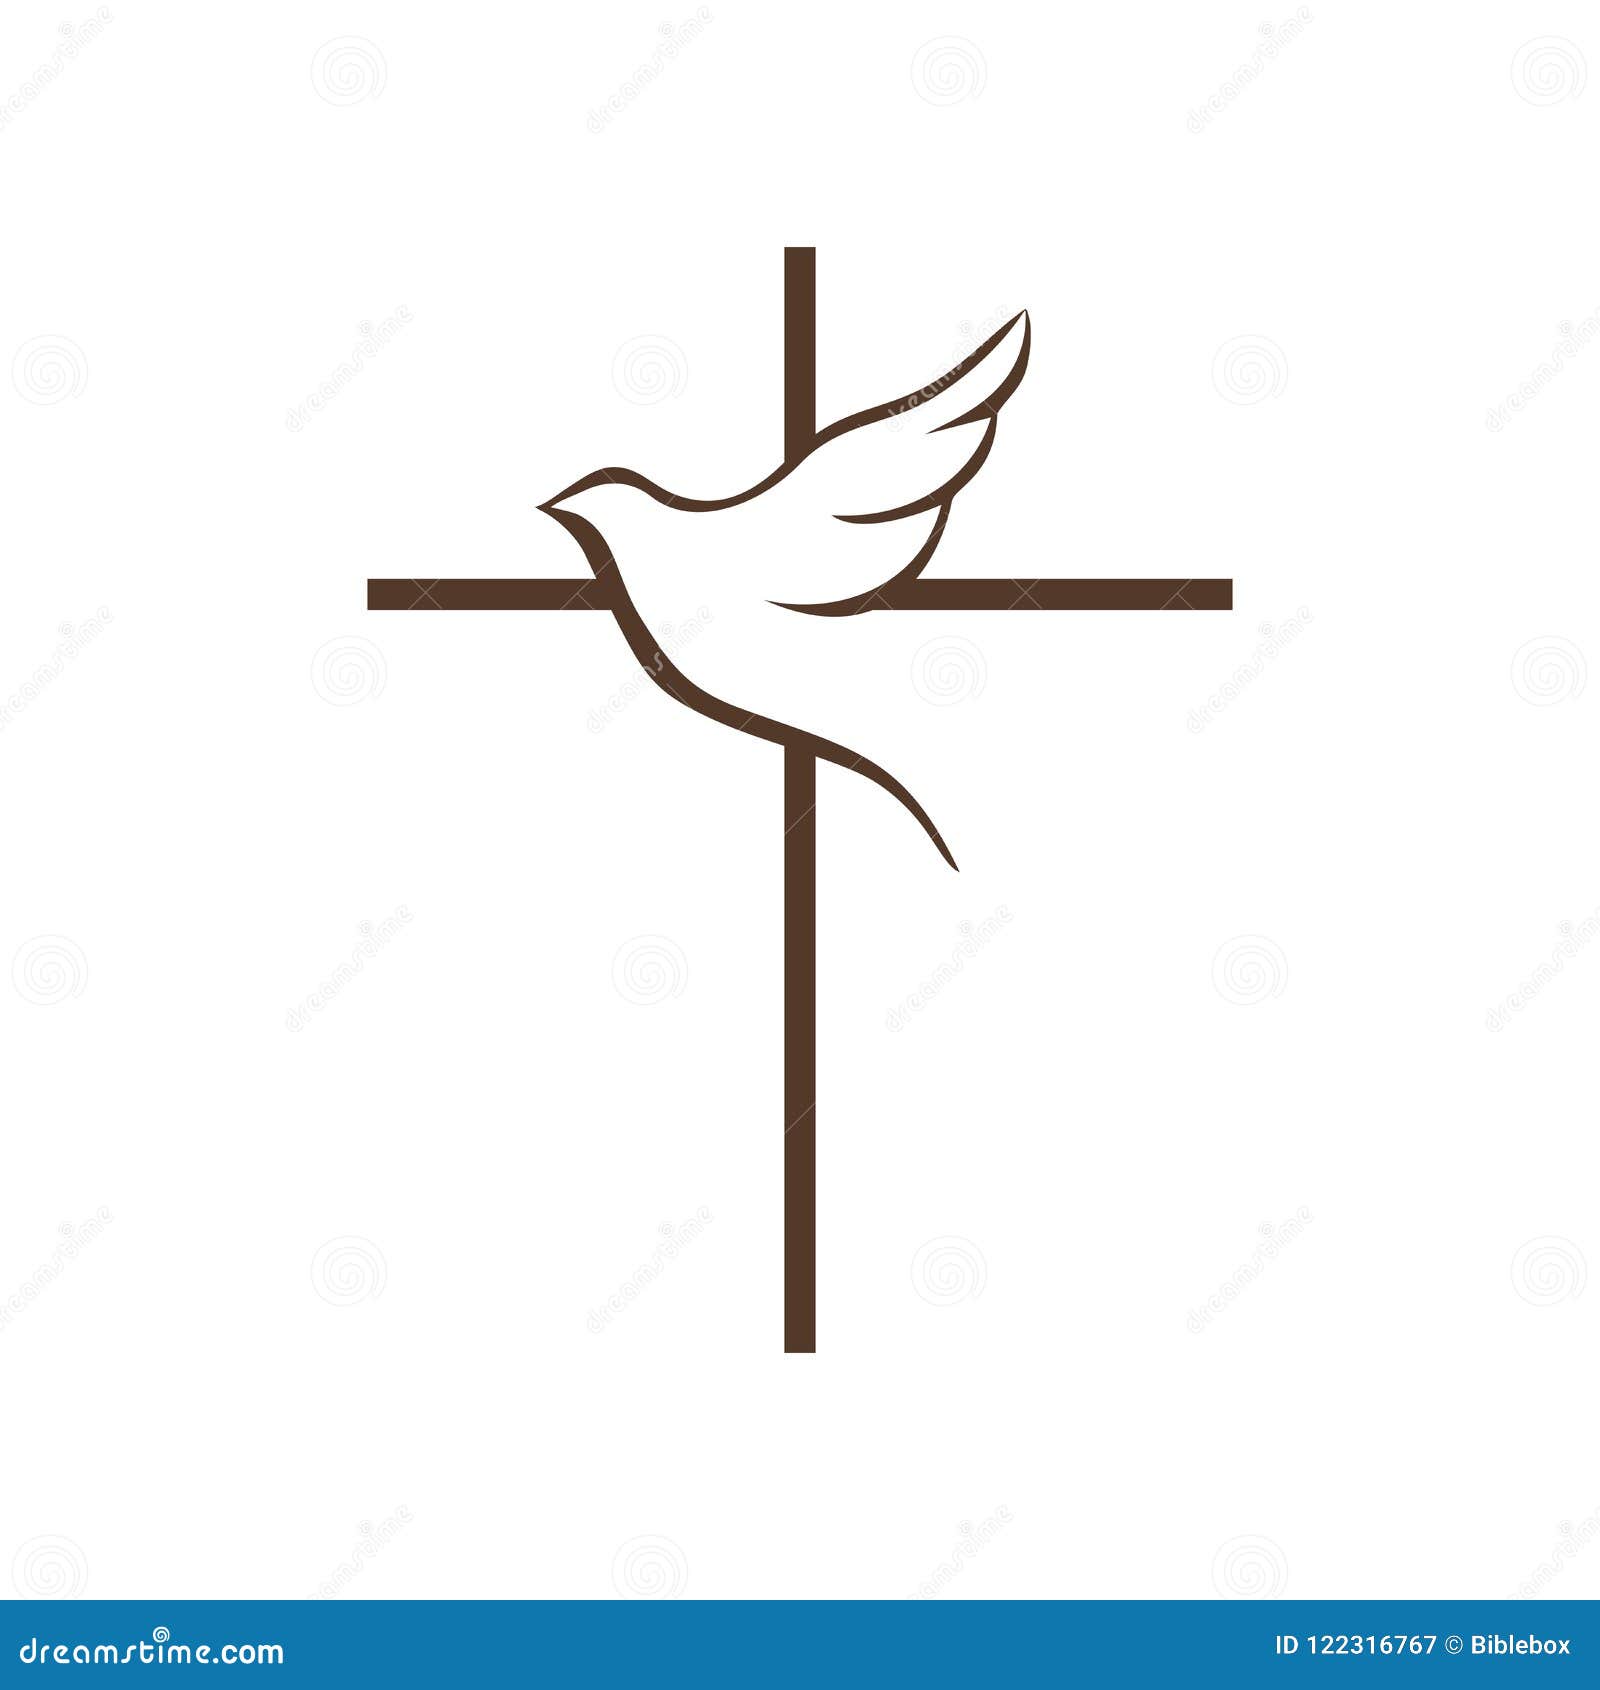 logo of the church. the cross of jesus christ and the flying dove is a  of the holy spirit.